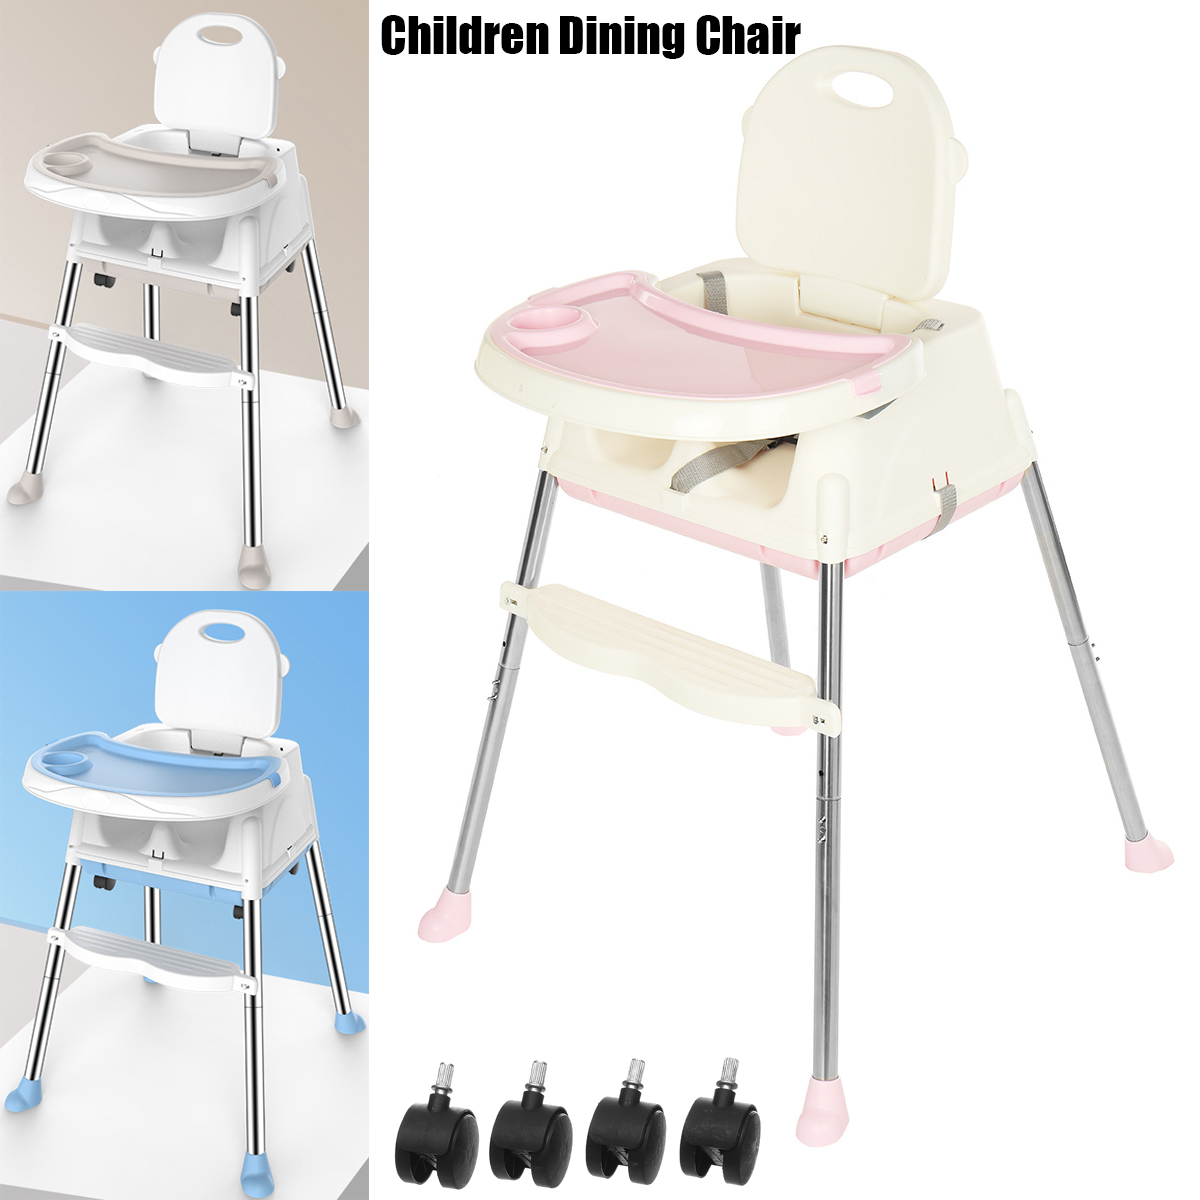 KUDOSALE-3-in-1-Adjustable-Baby-High-Chair-Table-Convertible-Play-Seat-Booster-Toddler-Feeding-with--1749429-3